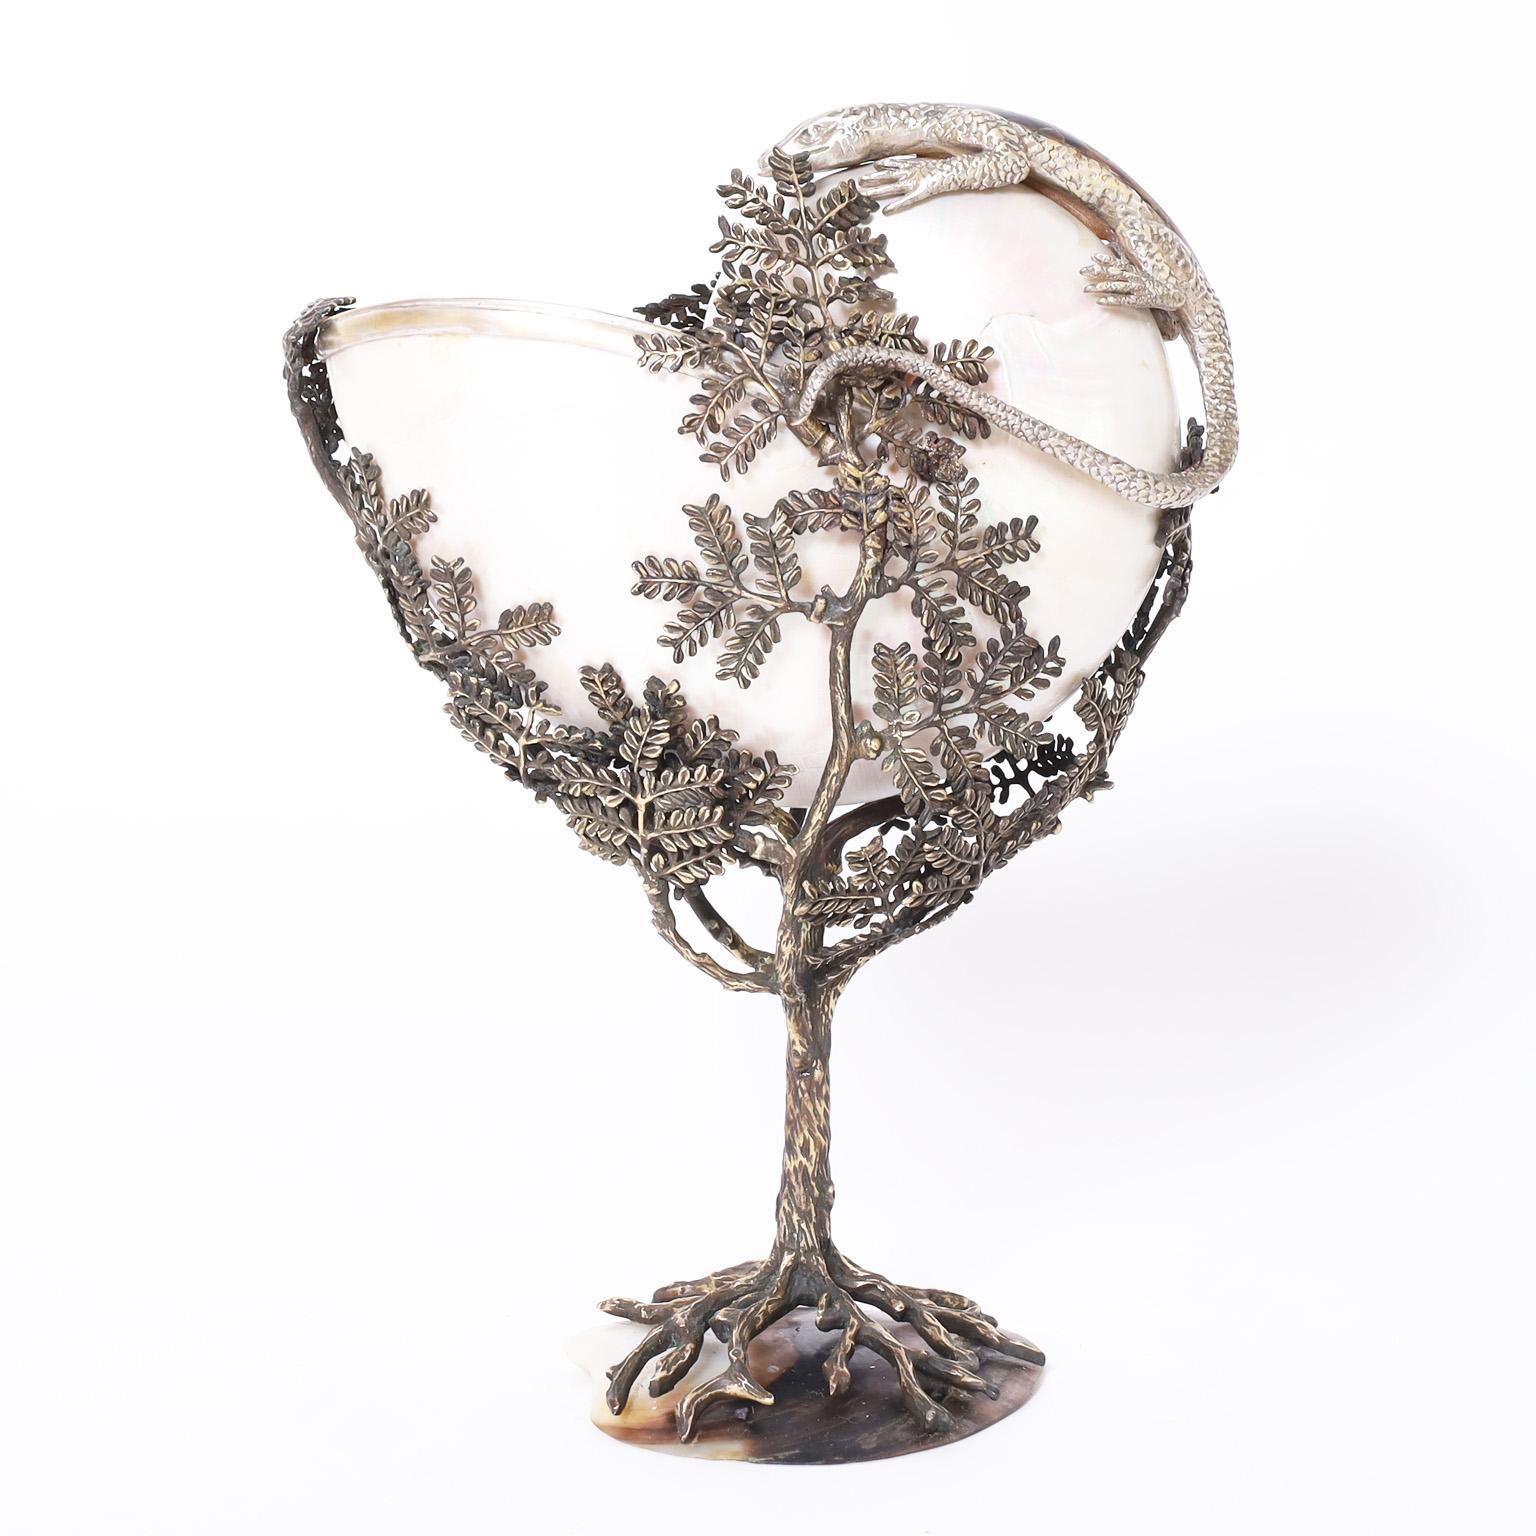 Intriguing vintage object of art with an eccentric composition having an organic nautilus shell in a cast metal tree on a penshell base featuring a silver plate lizard with a tortoise shell back.